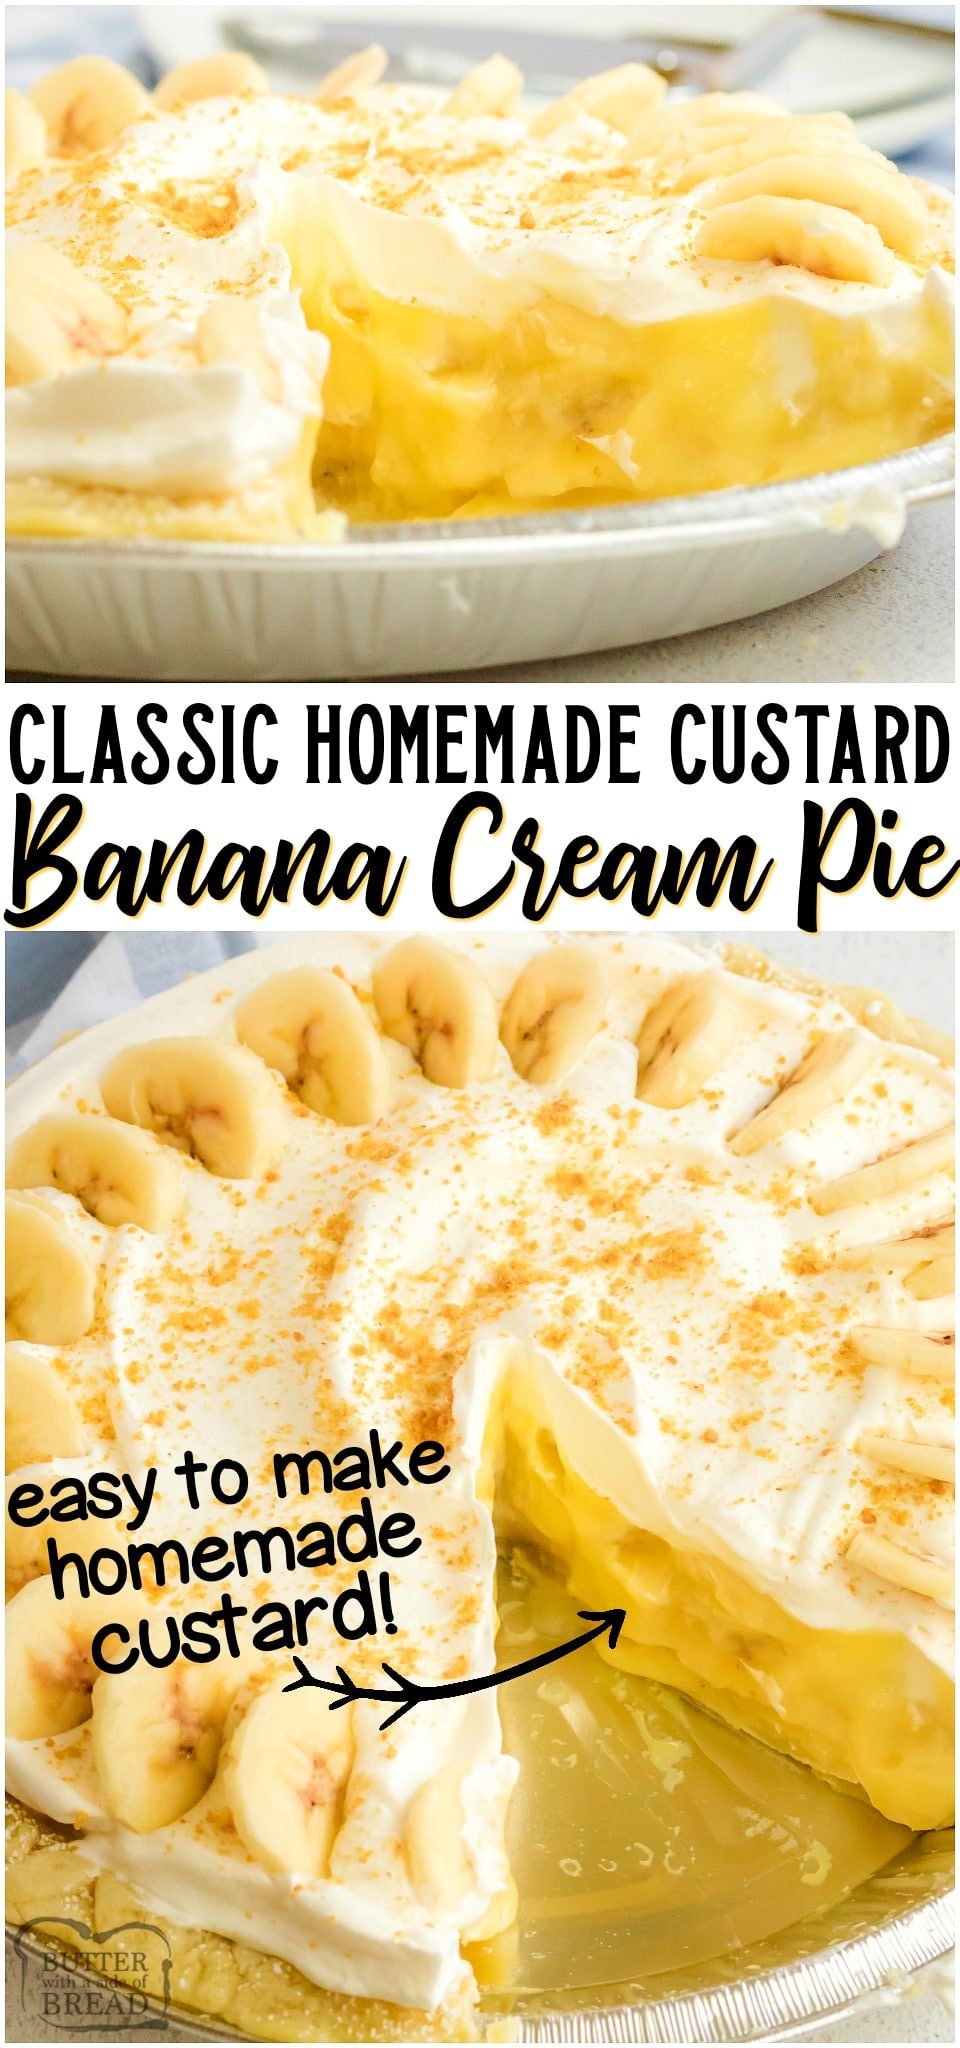 Homemade Banana Cream Pie is a classic! Creamy custard filling with sliced bananas all inside a flaky pie crust. Making a Banana Cream Pie recipe from scratch is easier than you think!